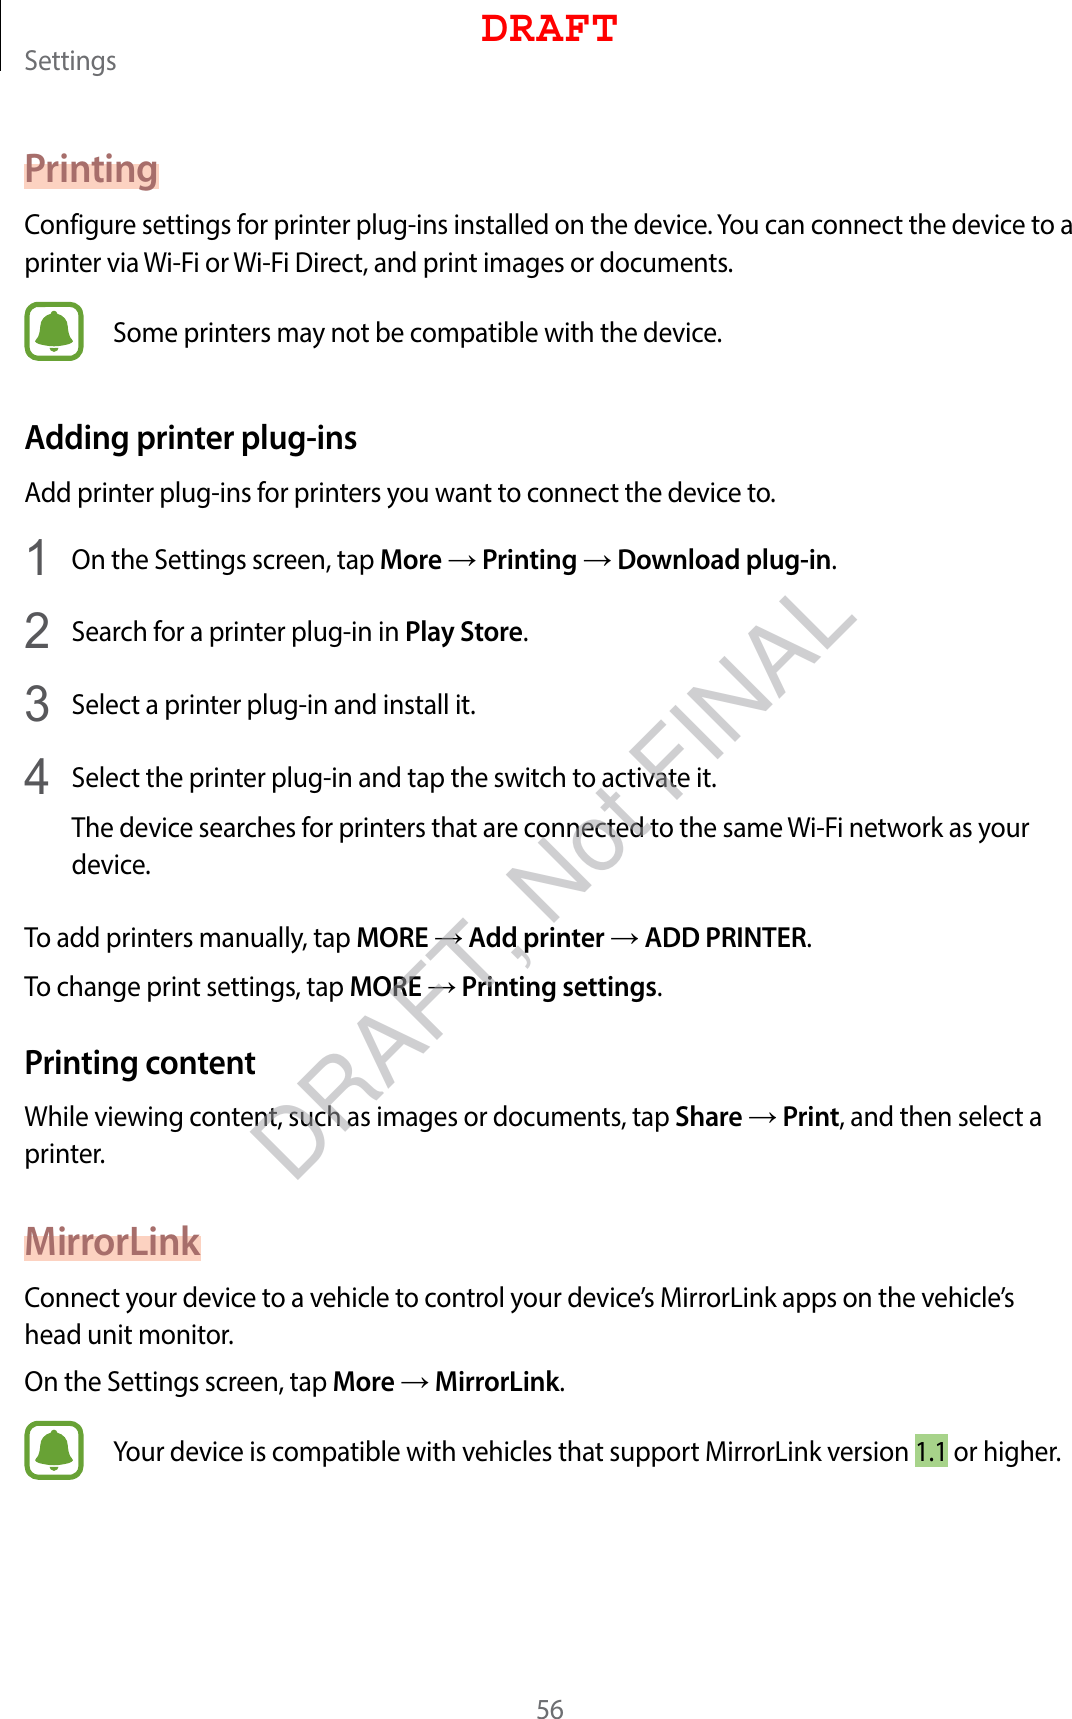 Settings56PrintingConfigure settings for printer plug-ins installed on the device. You can connect the device to a printer via Wi-Fi or Wi-Fi Direct, and print images or documents.Some printers may not be compatible with the device.Adding printer plug-insAdd printer plug-ins for printers you want to connect the device to.1  On the Settings screen, tap More → Printing → Download plug-in.2  Search for a printer plug-in in Play Store.3  Select a printer plug-in and install it.4  Select the printer plug-in and tap the switch to activate it.The device searches for printers that are connected to the same Wi-Fi network as your device.To add printers manually, tap MORE → Add printer → ADD PRINTER.To change print settings, tap MORE → Printing settings.Printing contentWhile viewing content, such as images or documents, tap Share → Print, and then select a printer.MirrorLinkConnect your device to a vehicle to control your device’s MirrorLink apps on the vehicle’s head unit monitor.On the Settings screen, tap More → MirrorLink.Your device is compatible with vehicles that support MirrorLink version 1.1 or higher.DRAFTDRAFT, Not FINAL